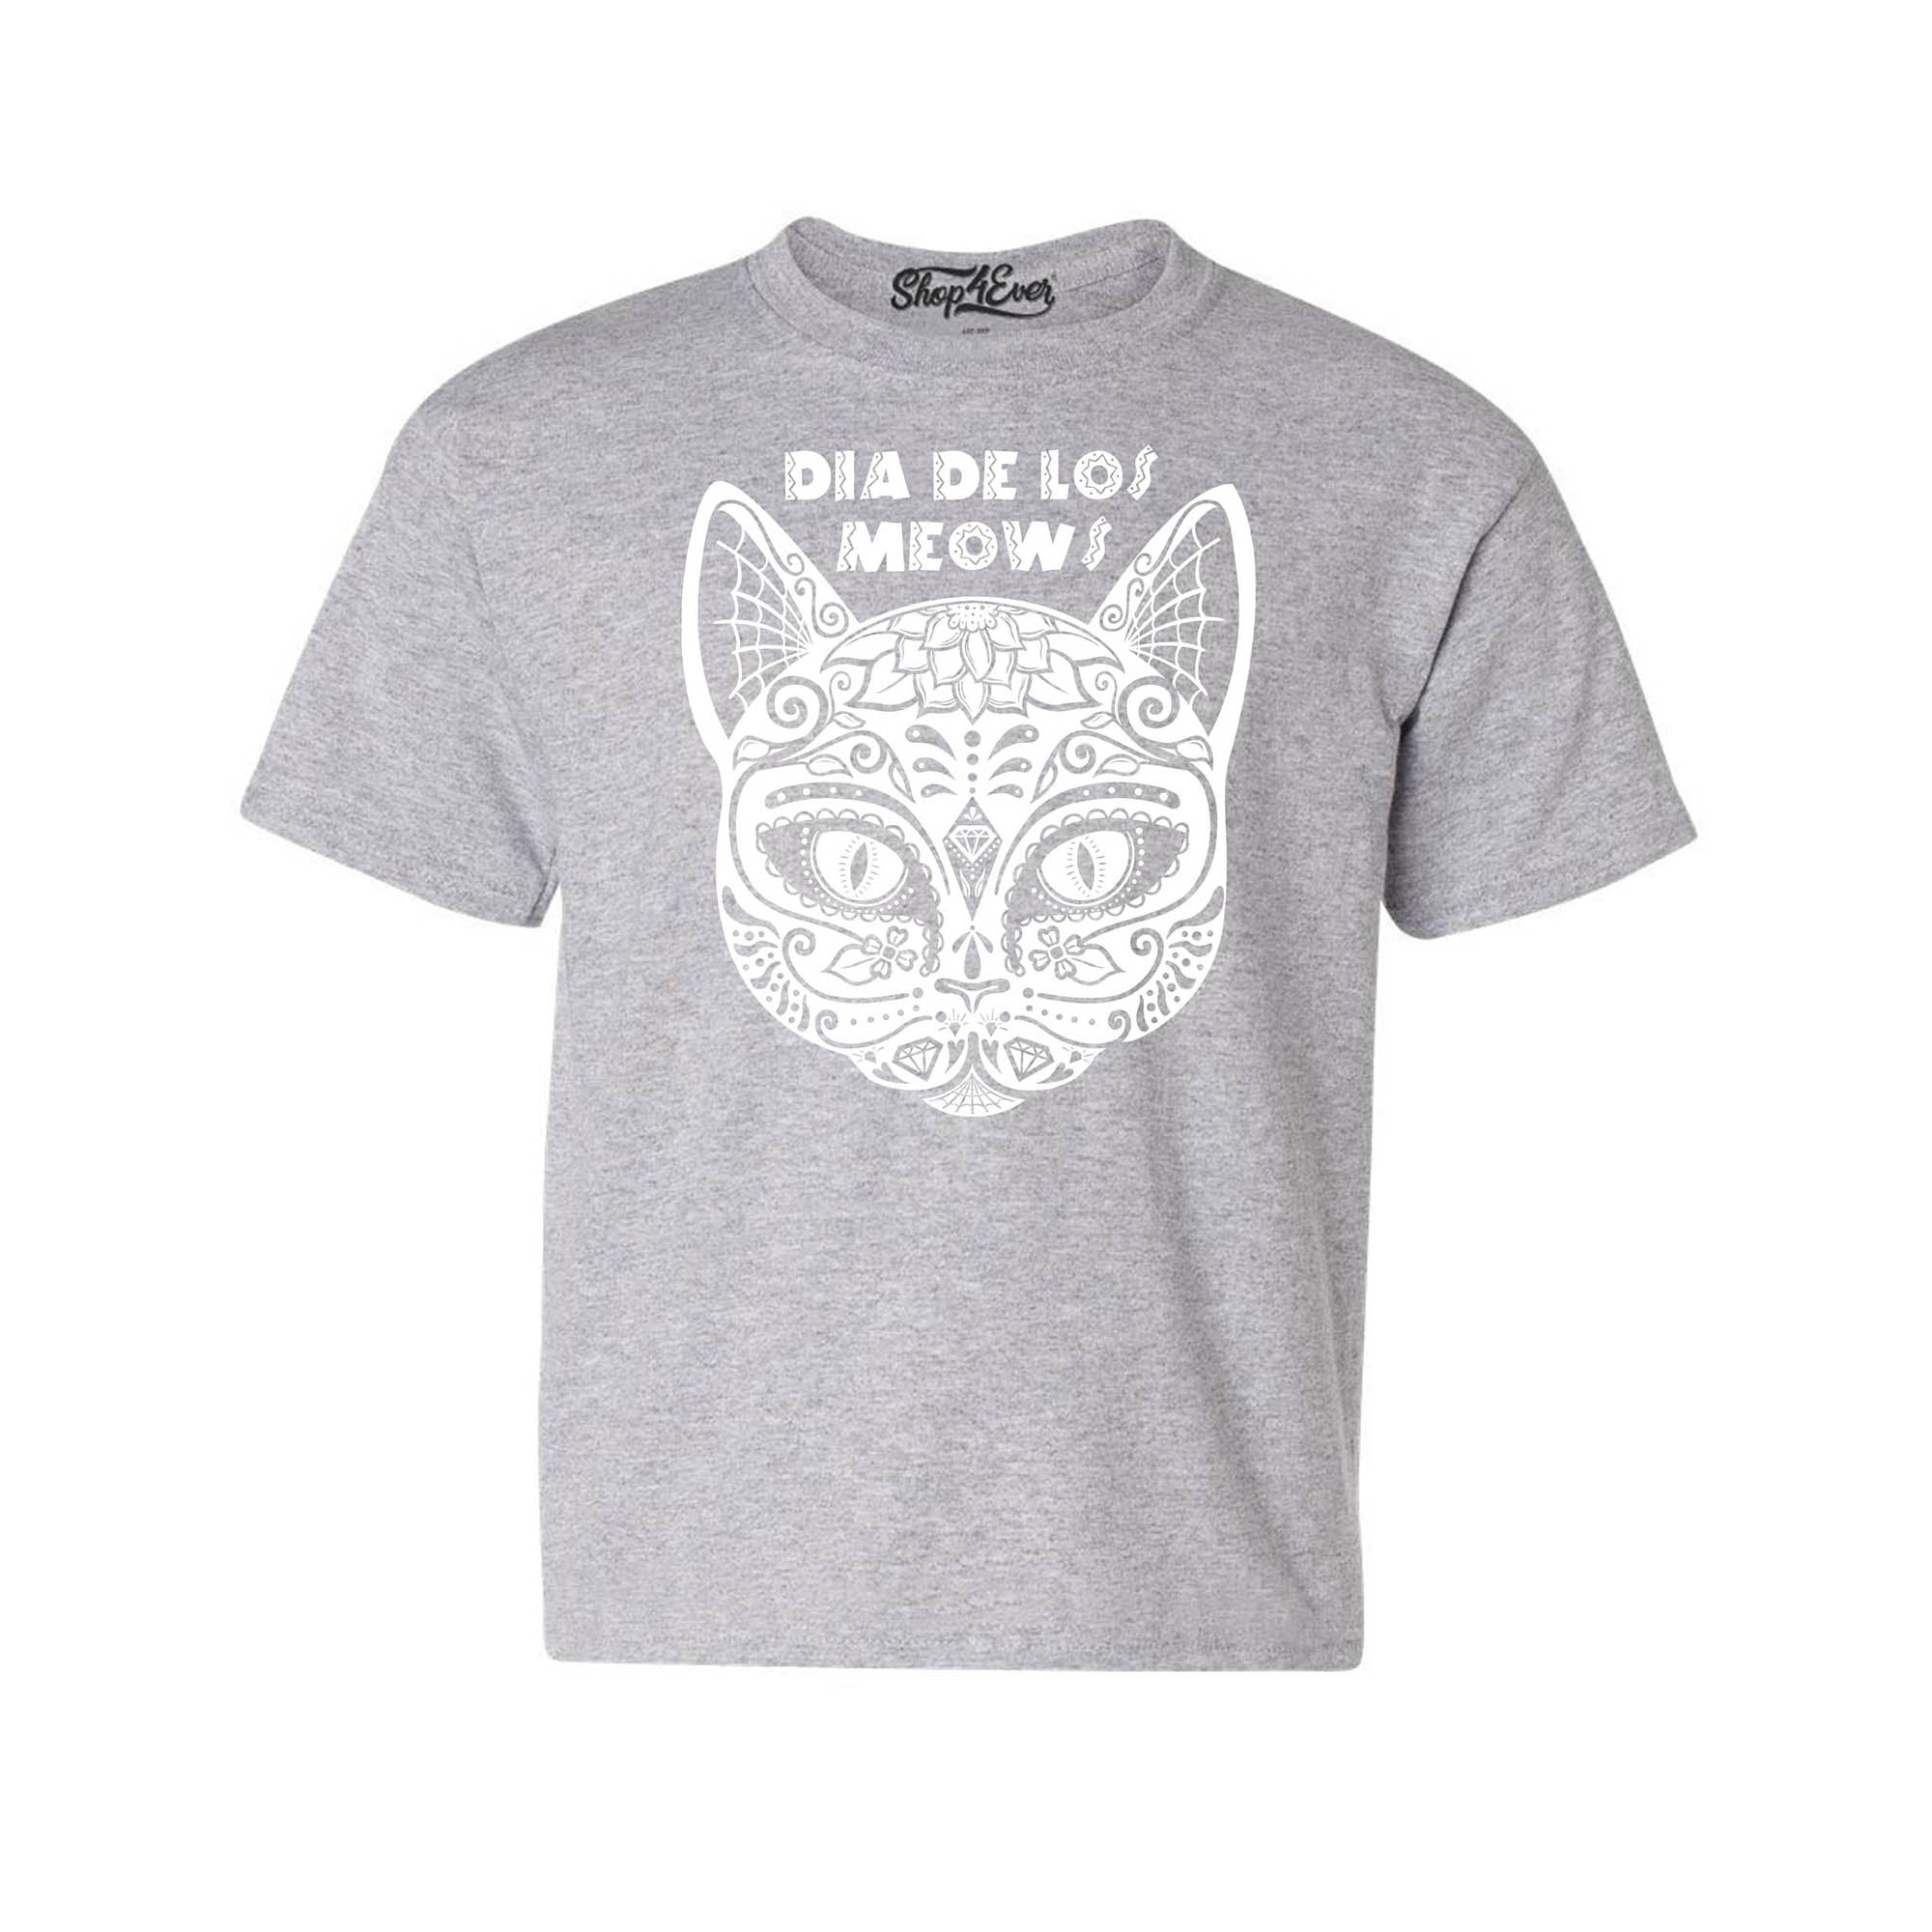 Dia De Los Meows Day of The Dead Youth's T-Shirt